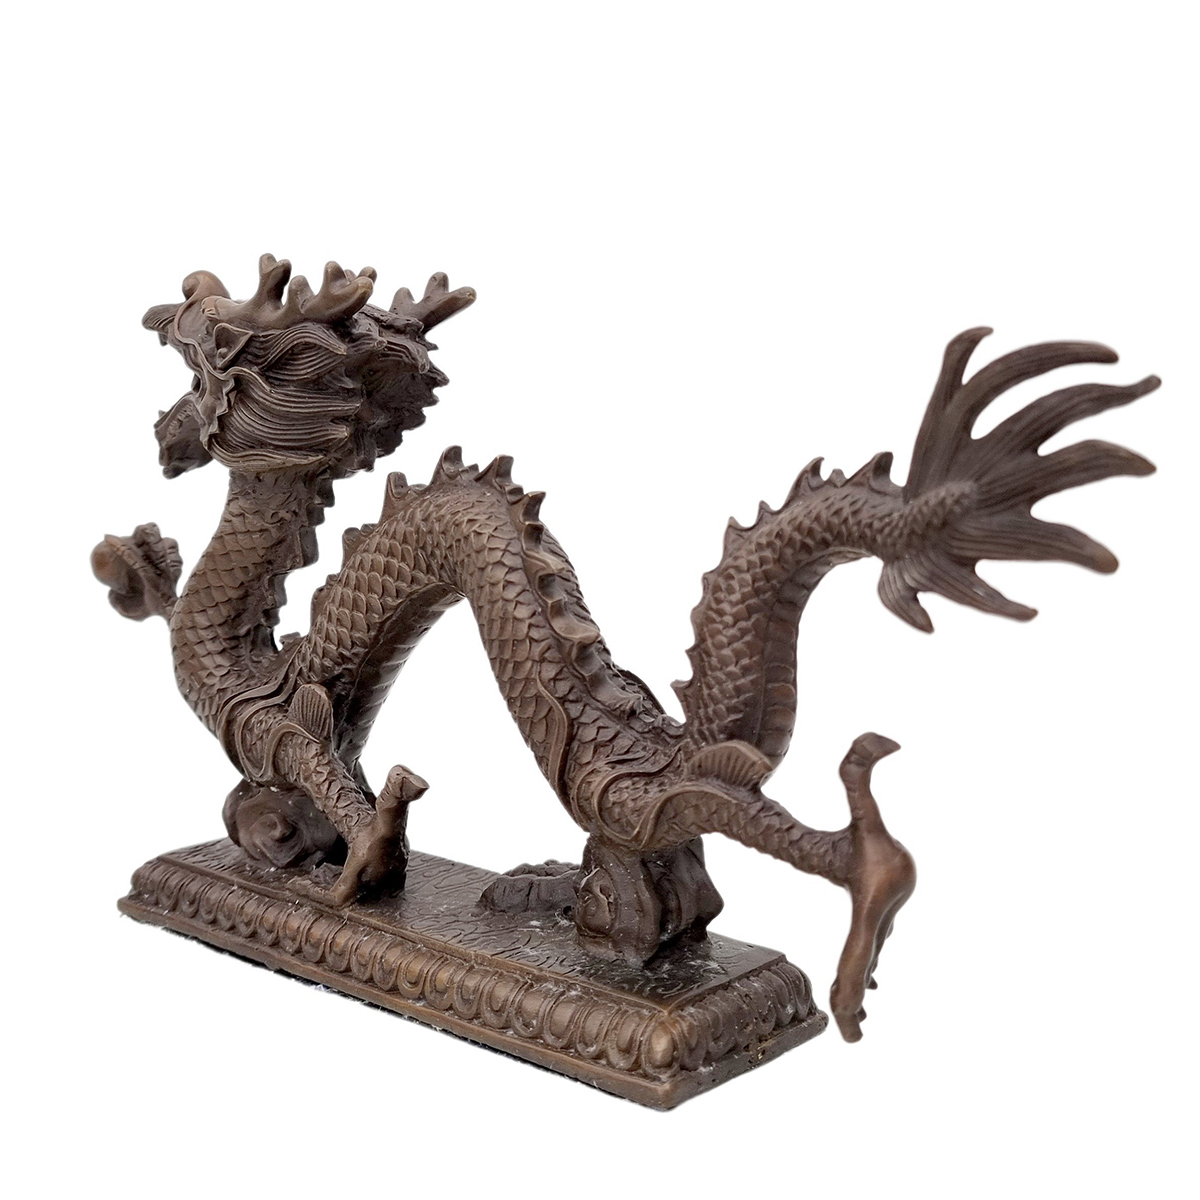 Collectible Dragon Figurines